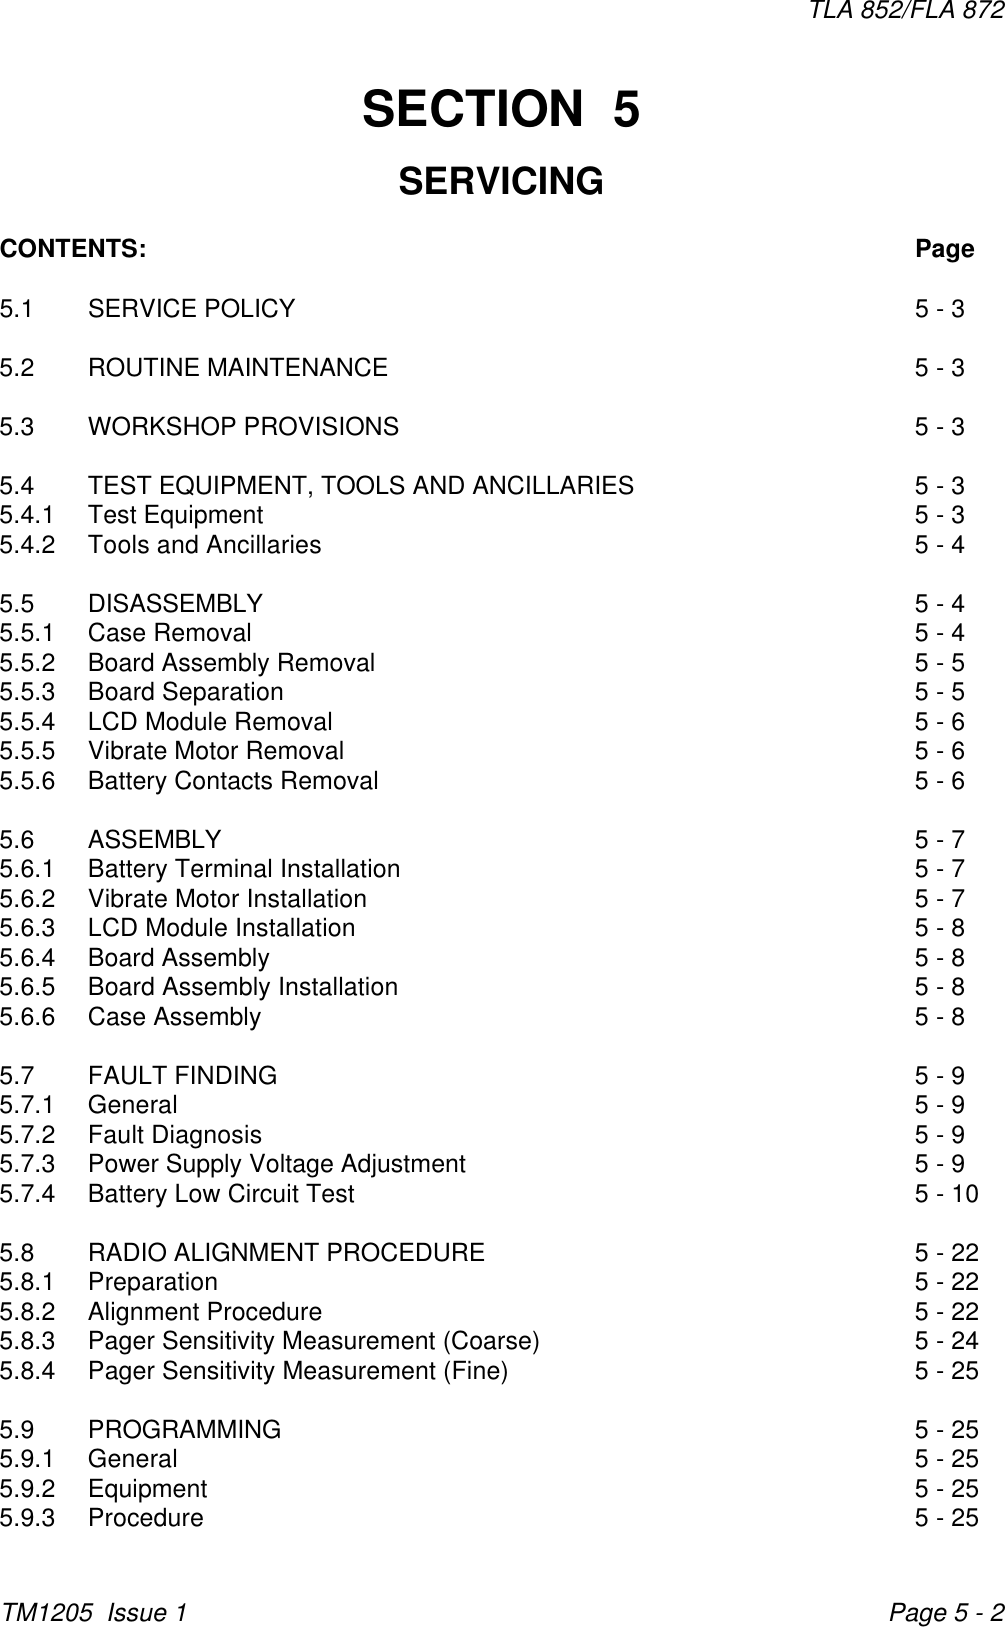 TLA 852/FLA 872TM1205  Issue 1 Page 5 - 2SECTION  5SERVICINGCONTENTS: Page5.1 SERVICE POLICY 5 - 35.2 ROUTINE MAINTENANCE 5 - 35.3 WORKSHOP PROVISIONS 5 - 35.4 TEST EQUIPMENT, TOOLS AND ANCILLARIES 5 - 35.4.1 Test Equipment 5 - 35.4.2 Tools and Ancillaries 5 - 45.5 DISASSEMBLY 5 - 45.5.1 Case Removal 5 - 45.5.2 Board Assembly Removal 5 - 55.5.3 Board Separation 5 - 55.5.4 LCD Module Removal 5 - 65.5.5 Vibrate Motor Removal 5 - 65.5.6 Battery Contacts Removal 5 - 65.6 ASSEMBLY 5 - 75.6.1 Battery Terminal Installation 5 - 75.6.2 Vibrate Motor Installation 5 - 75.6.3 LCD Module Installation 5 - 85.6.4 Board Assembly 5 - 85.6.5 Board Assembly Installation 5 - 85.6.6 Case Assembly 5 - 85.7 FAULT FINDING 5 - 95.7.1 General 5 - 95.7.2 Fault Diagnosis 5 - 95.7.3 Power Supply Voltage Adjustment 5 - 95.7.4 Battery Low Circuit Test 5 - 105.8 RADIO ALIGNMENT PROCEDURE 5 - 225.8.1 Preparation 5 - 225.8.2 Alignment Procedure 5 - 225.8.3 Pager Sensitivity Measurement (Coarse) 5 - 245.8.4 Pager Sensitivity Measurement (Fine) 5 - 255.9 PROGRAMMING 5 - 255.9.1 General 5 - 255.9.2 Equipment 5 - 255.9.3 Procedure 5 - 25